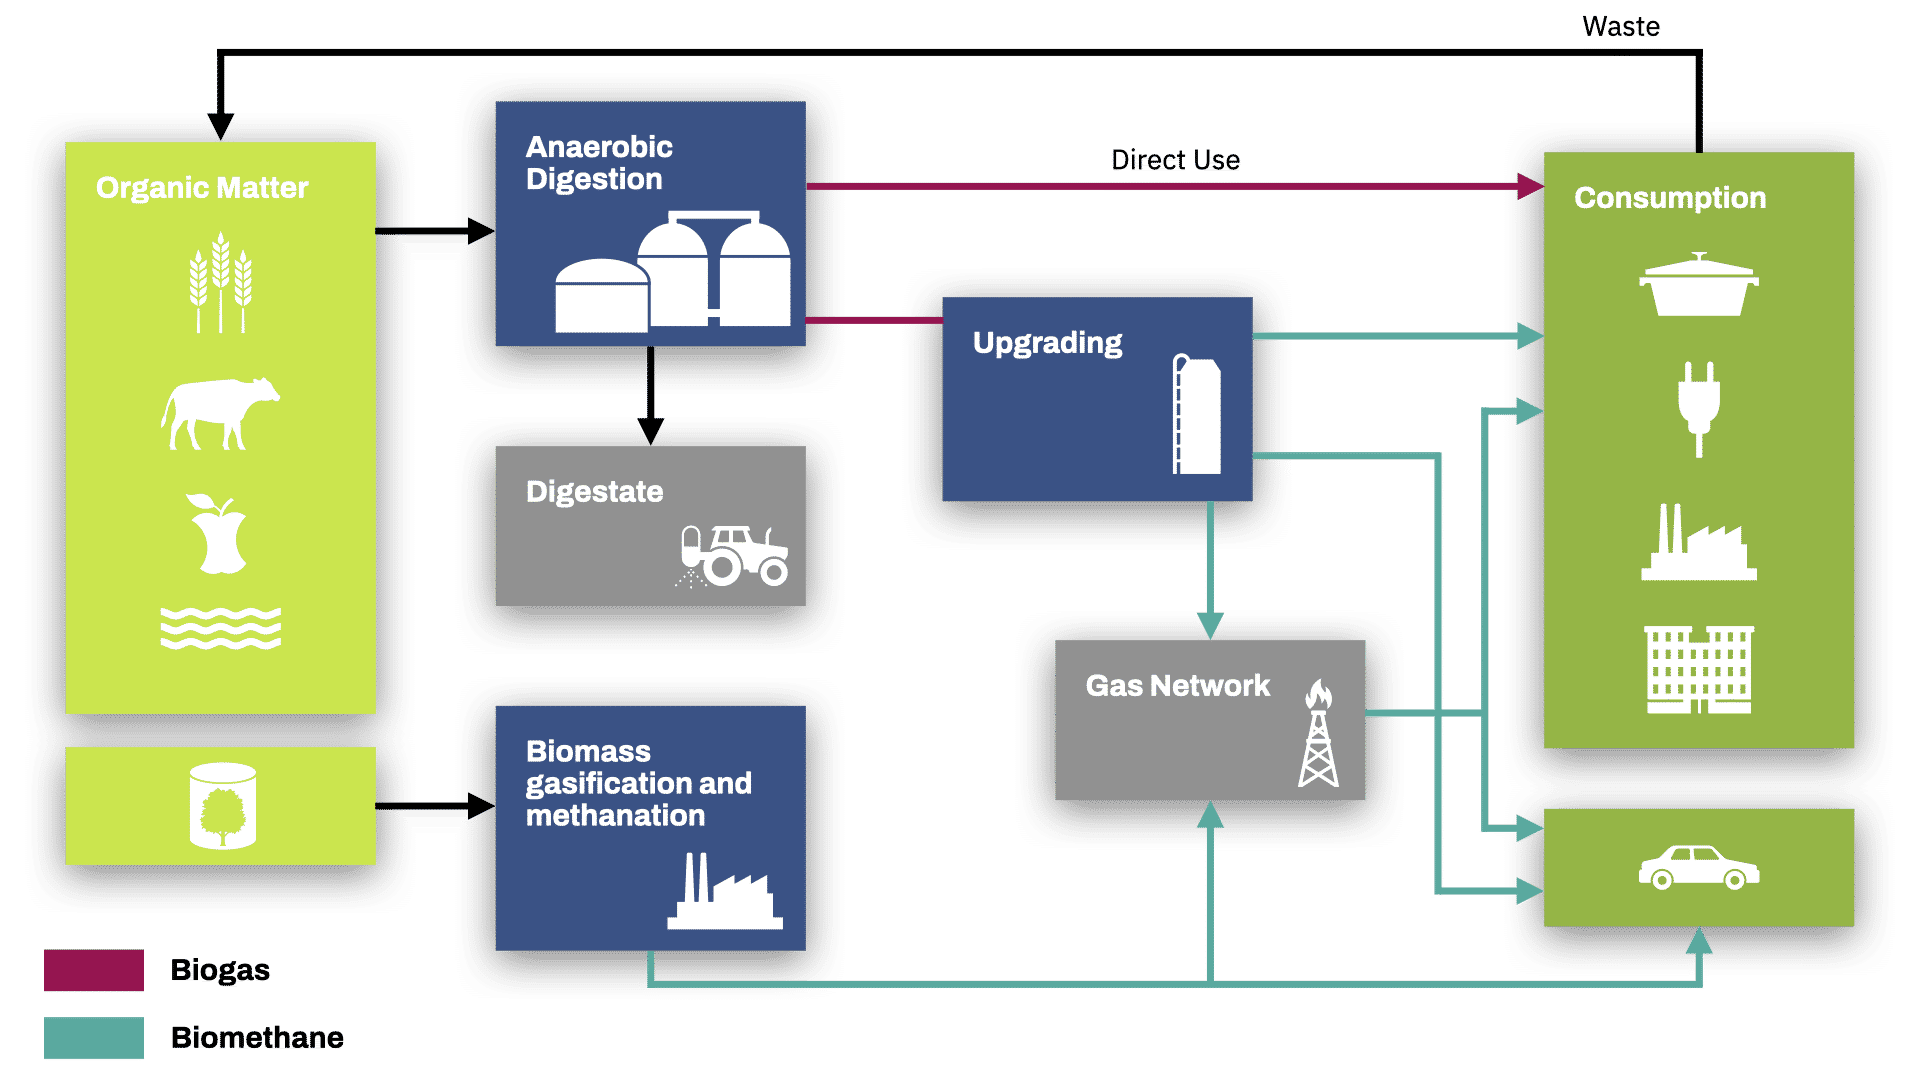 Biogas and biomethane flow chart of direct and indirect uses.